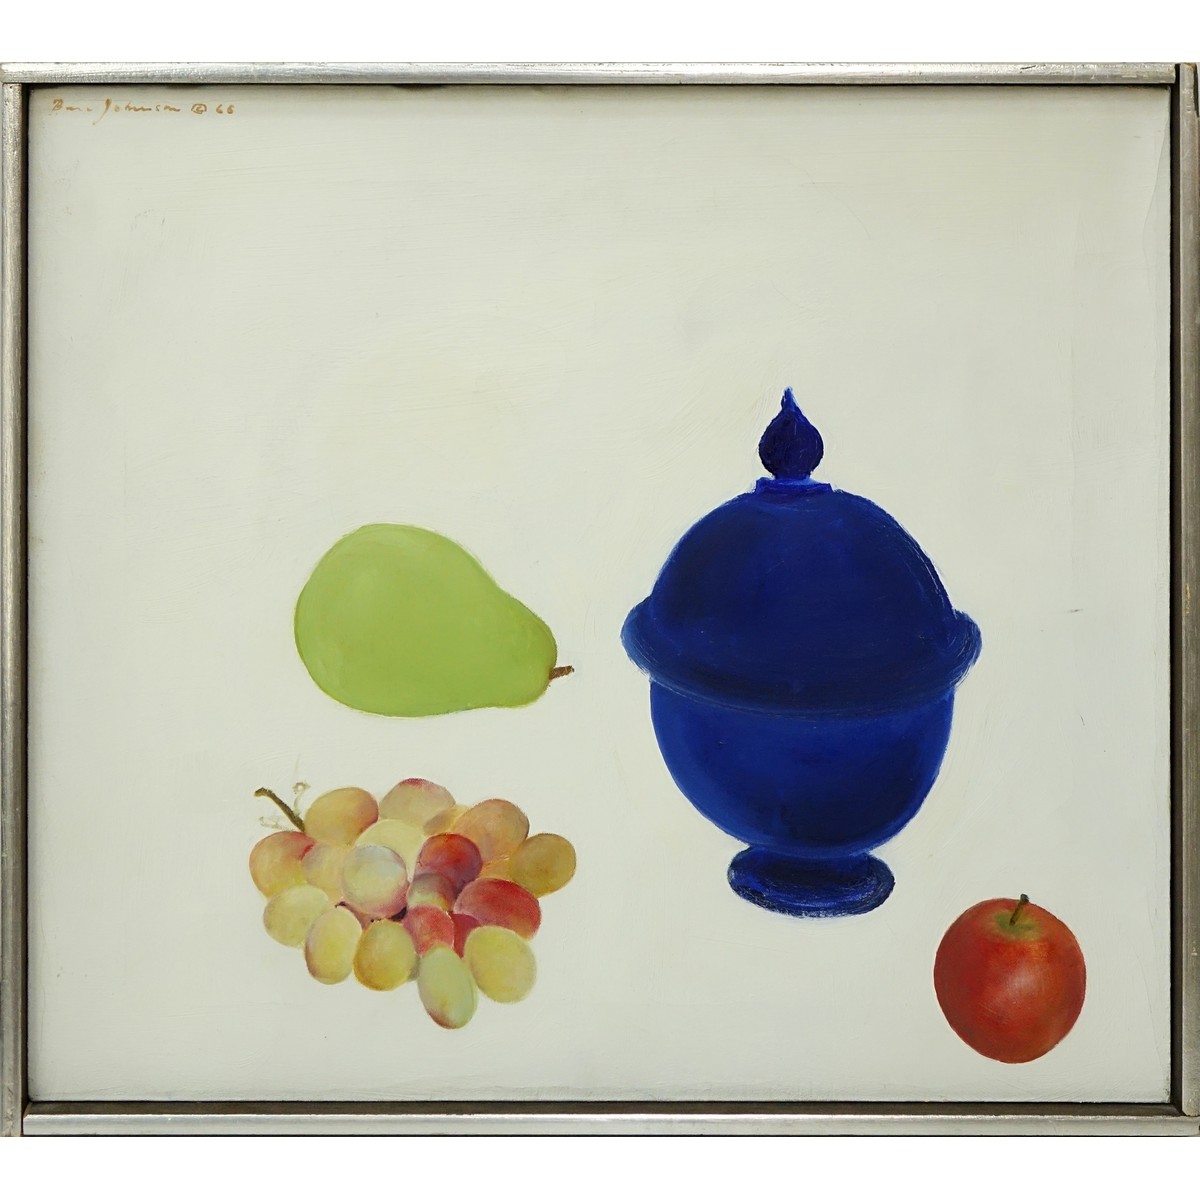 Ben Johnson, American (1902 - 1967) Oil on canvas "Blue Sugar Bowl". Signed upper left, dated '68, Label from Gallery Dache' en verso.